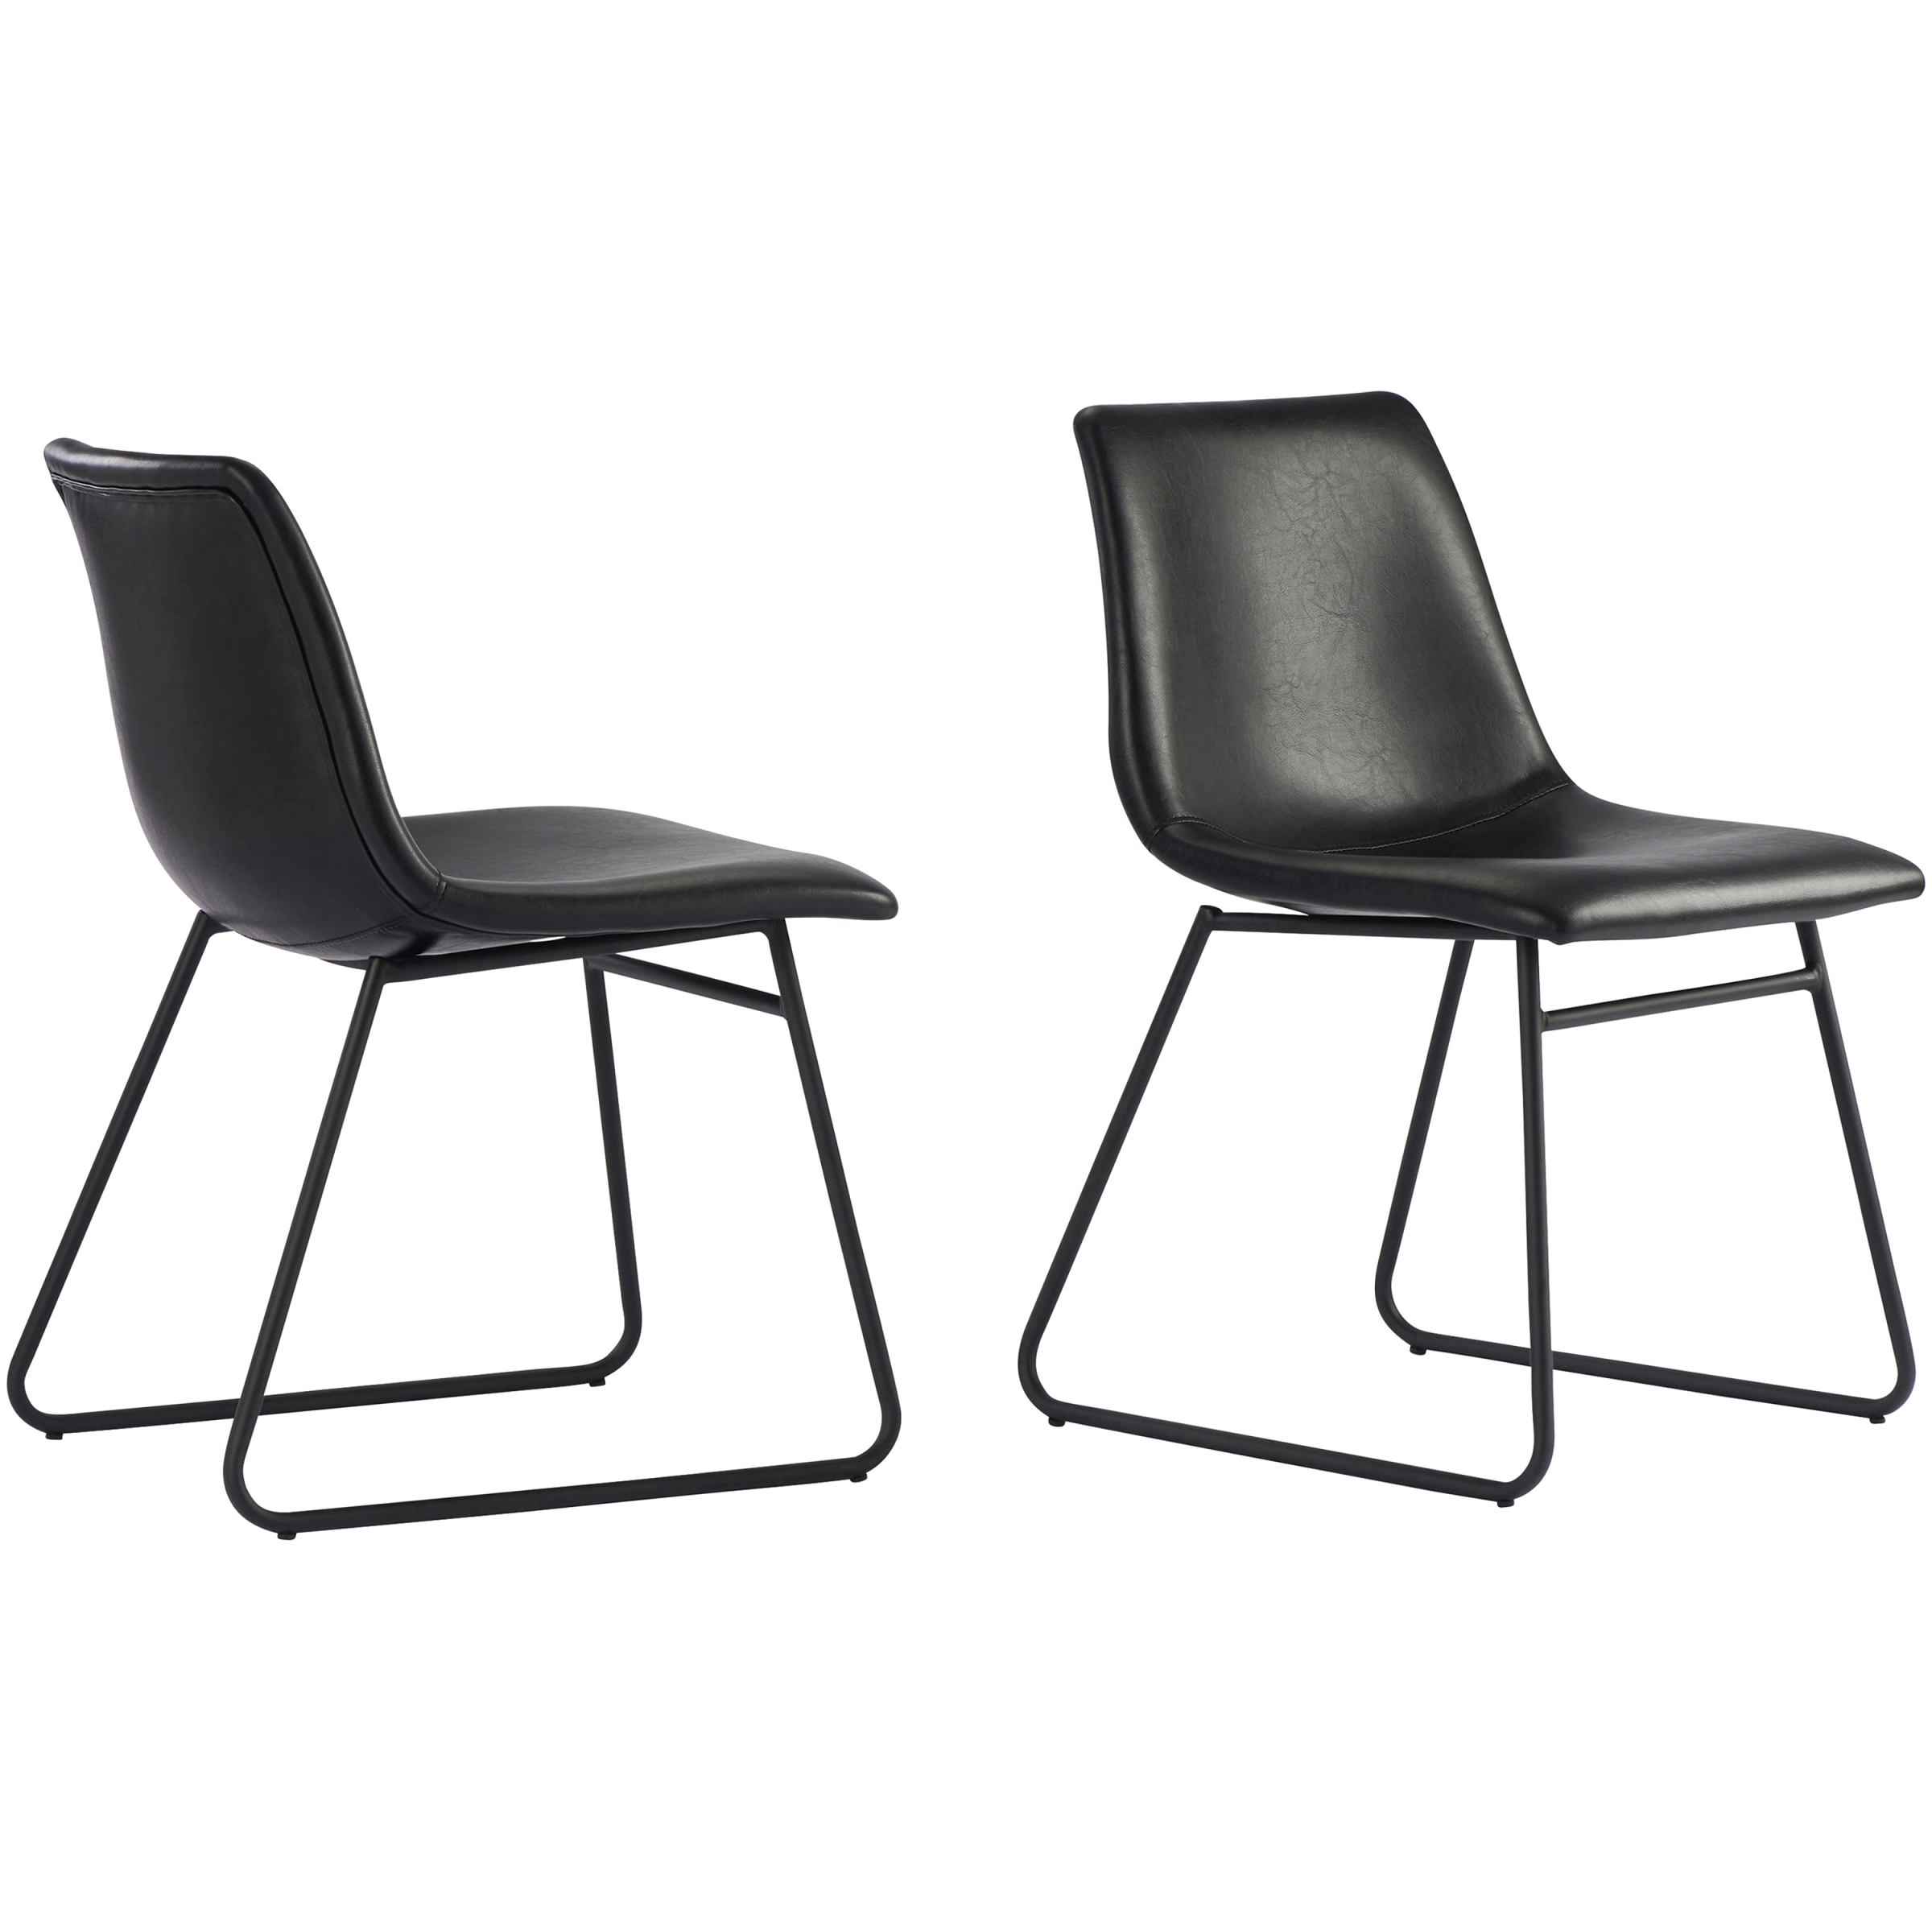 Better Homes & Gardens Dickson Dining Chairs, Set of 2, Black - image 1 of 4